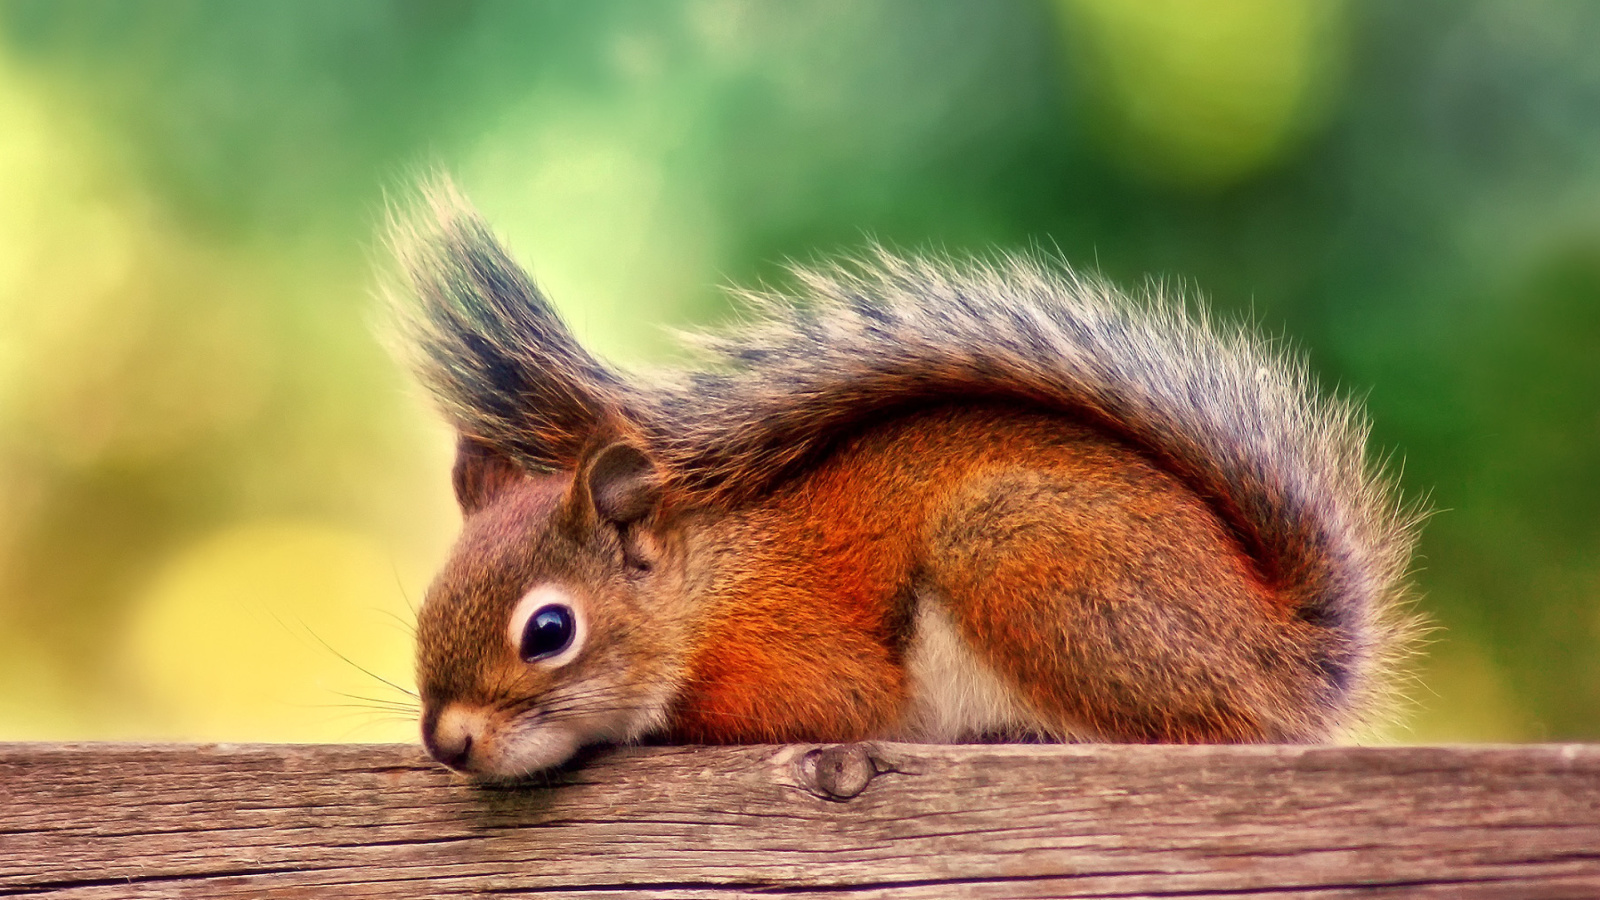 American red squirrel wallpaper 1600x900